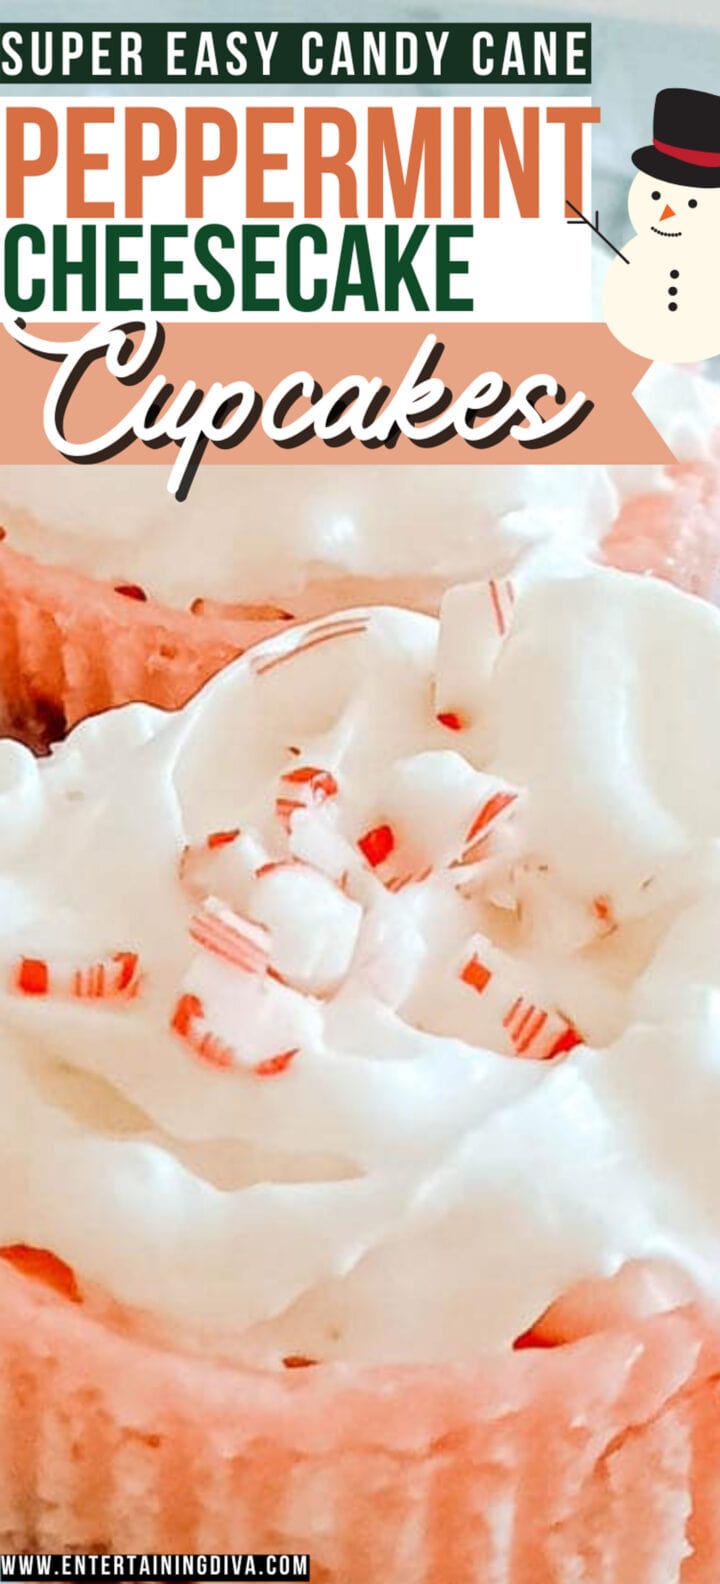 Easy Candy Cane Peppermint Cheesecake Cupcakes